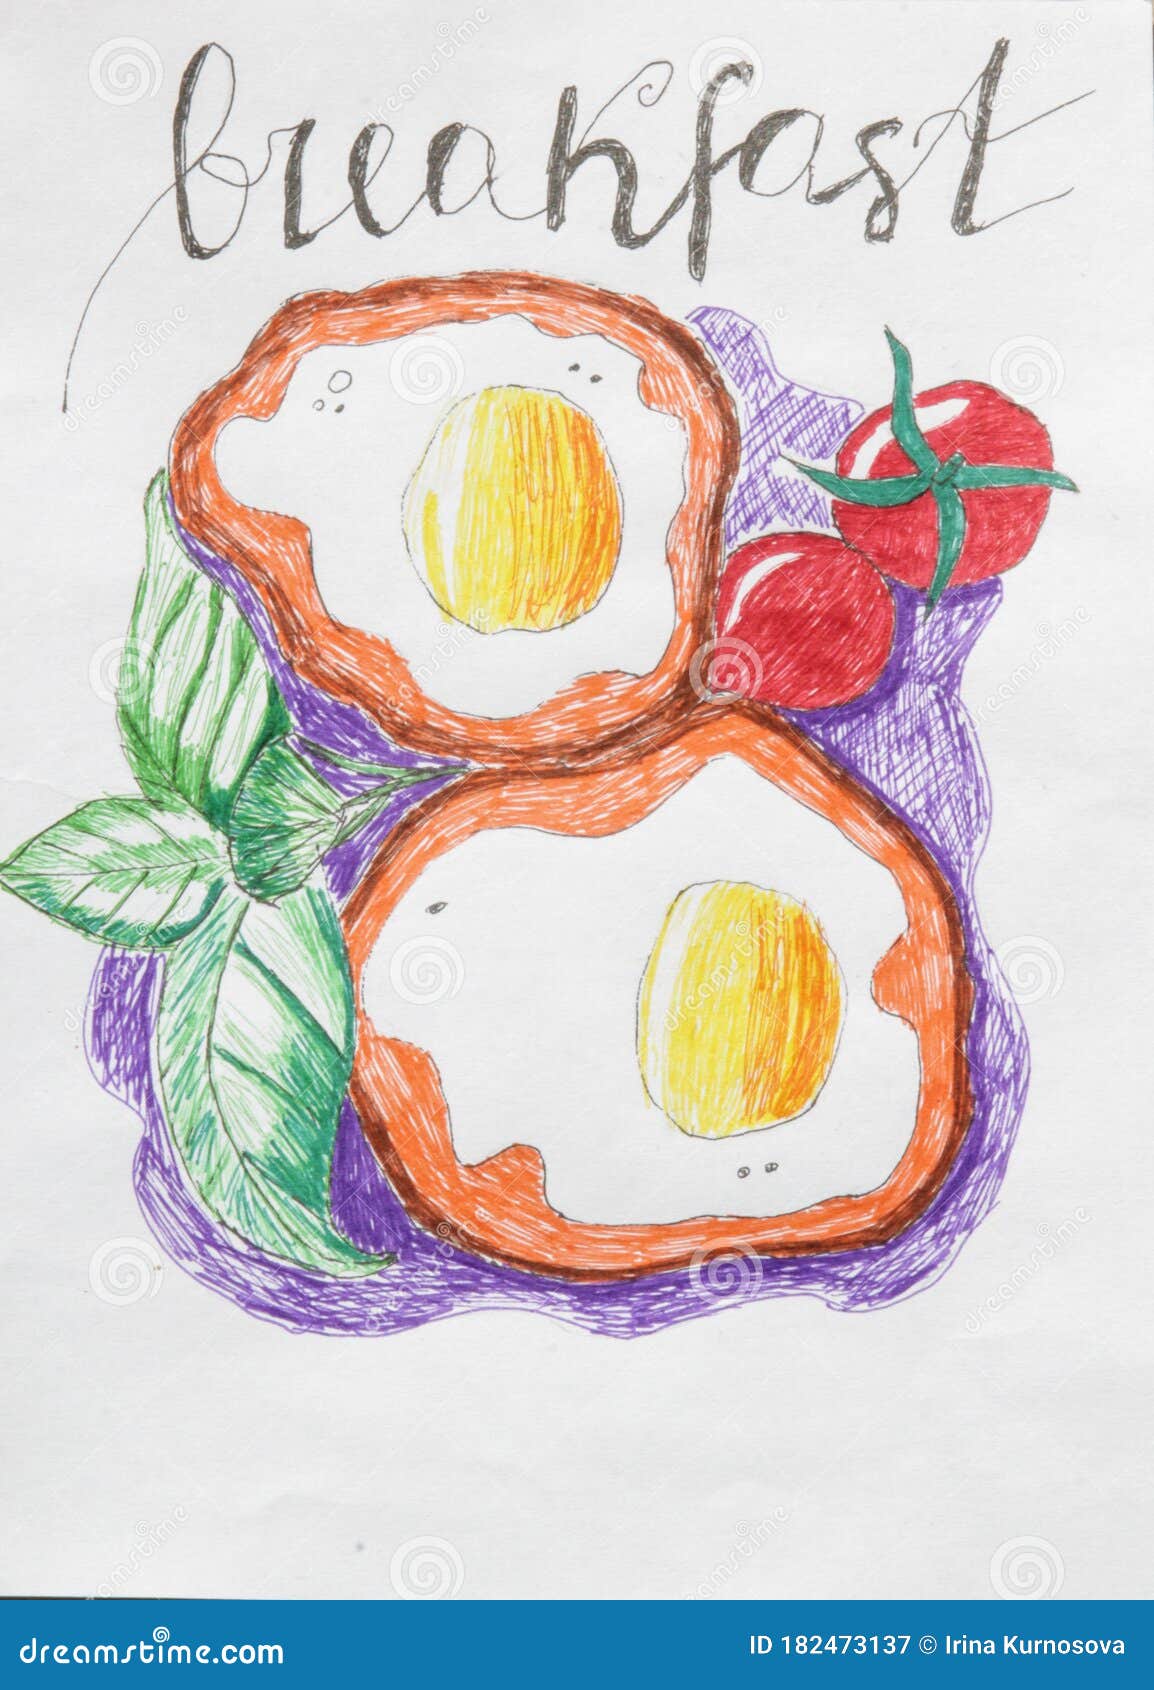 hand drawn fried egg with tomate and basilic. sketch style icon.